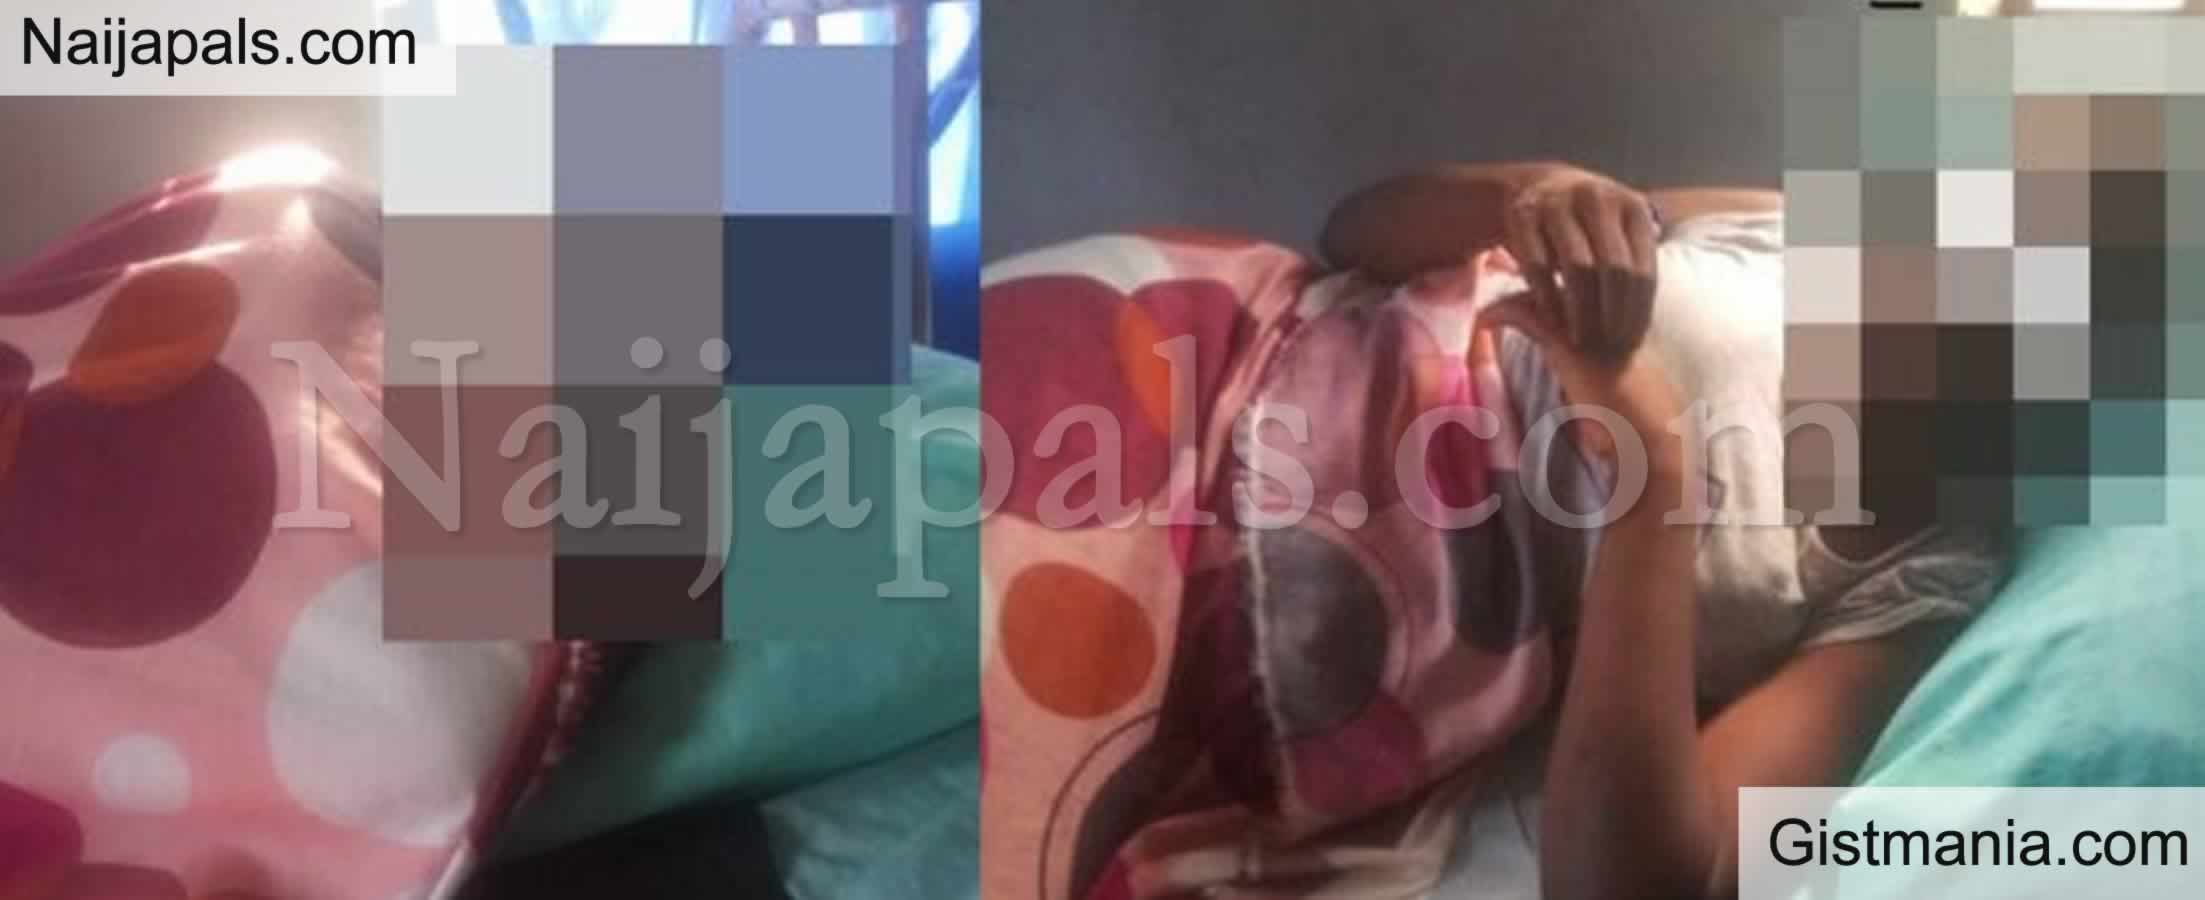 45-Year-Old Man, Samson Adedokun Defiles His 16-Year-Old Daughter Inside Their Home In Lagos